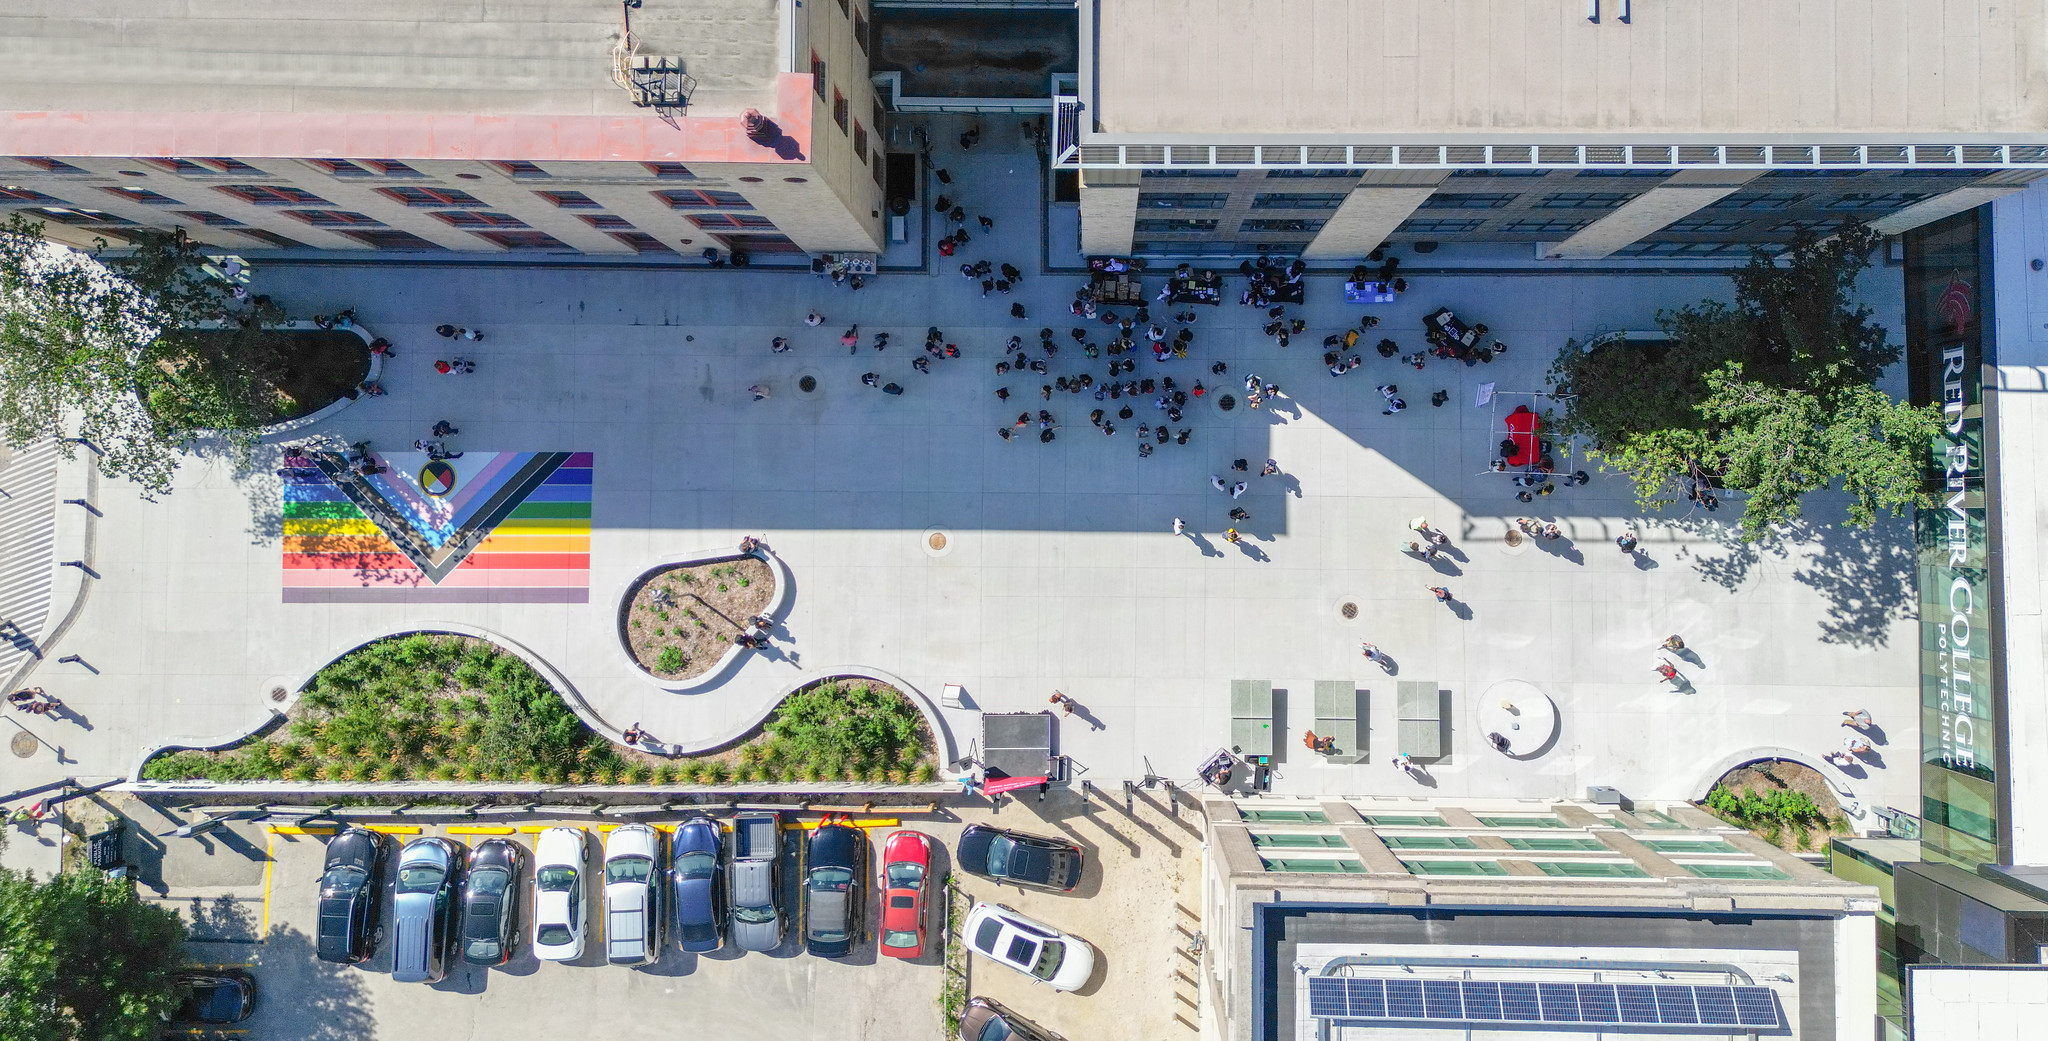 RRC Polytech's Exchange District Campus as seen from above, showcasing the Elgin Avenue promenade and Rainbow Walkway painted on the pavement.